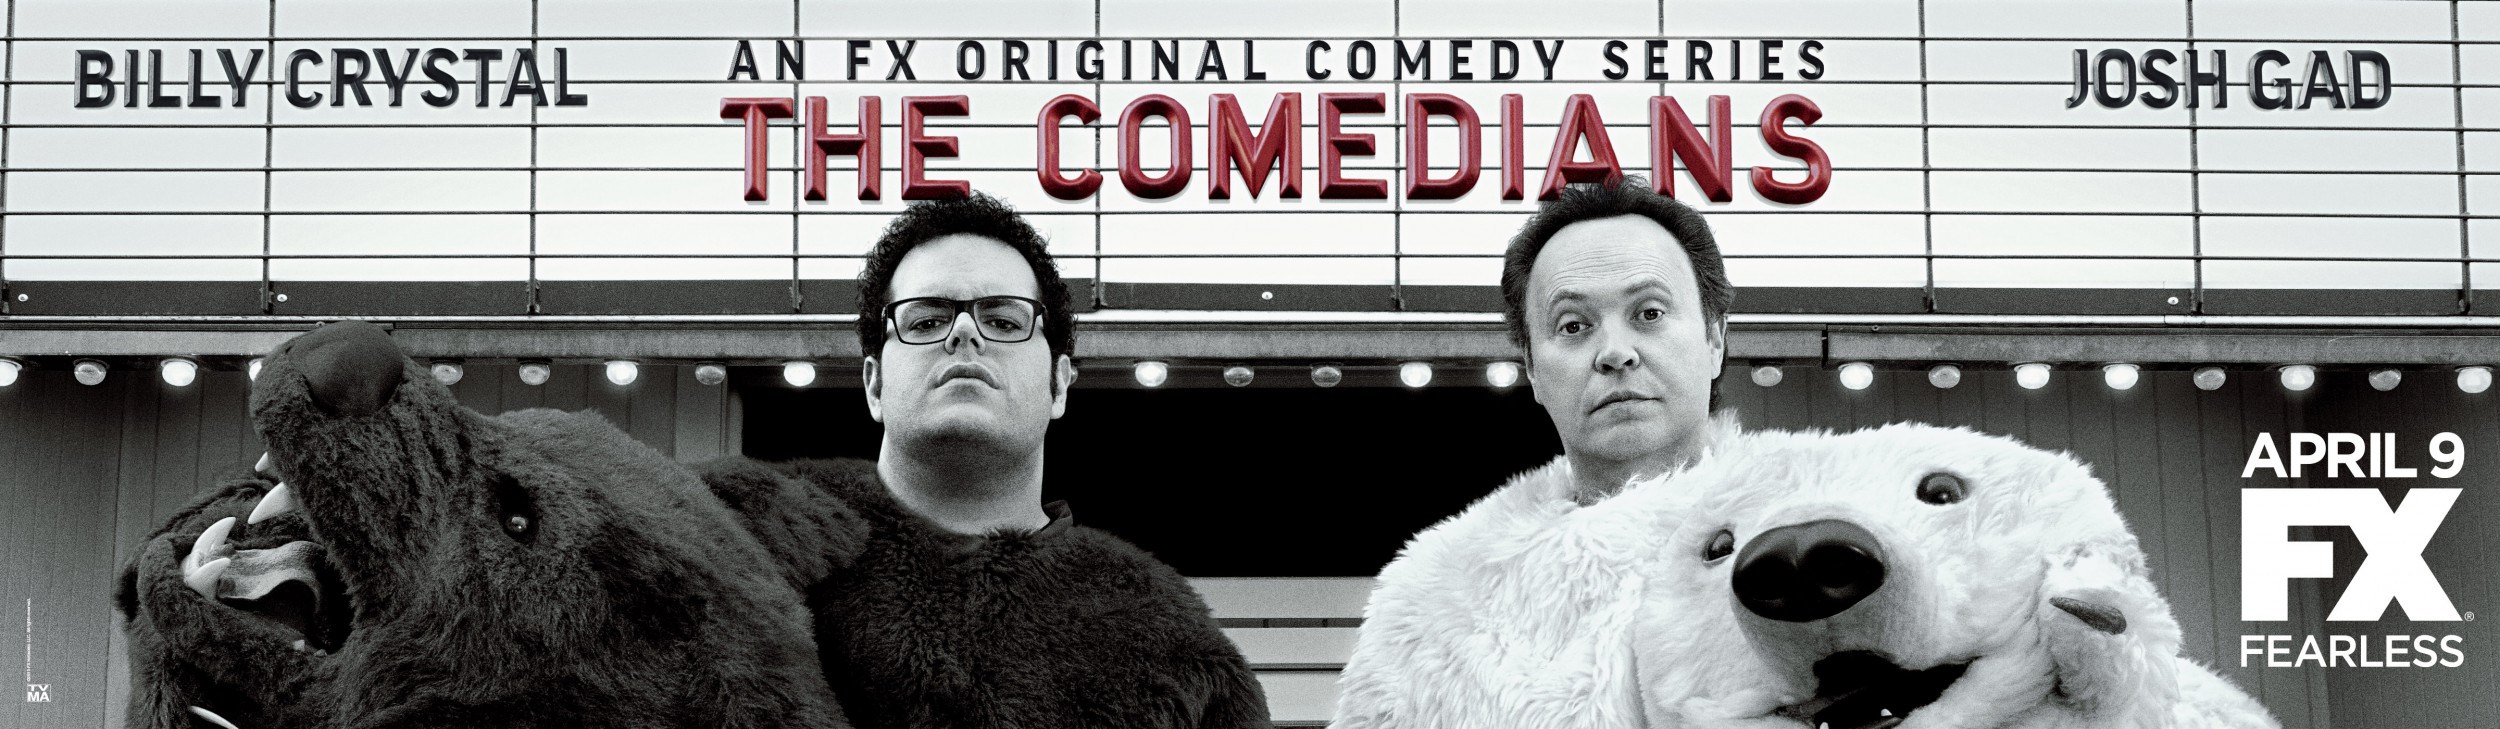 Mega Sized Movie Poster Image for The Comedians (#3 of 3)